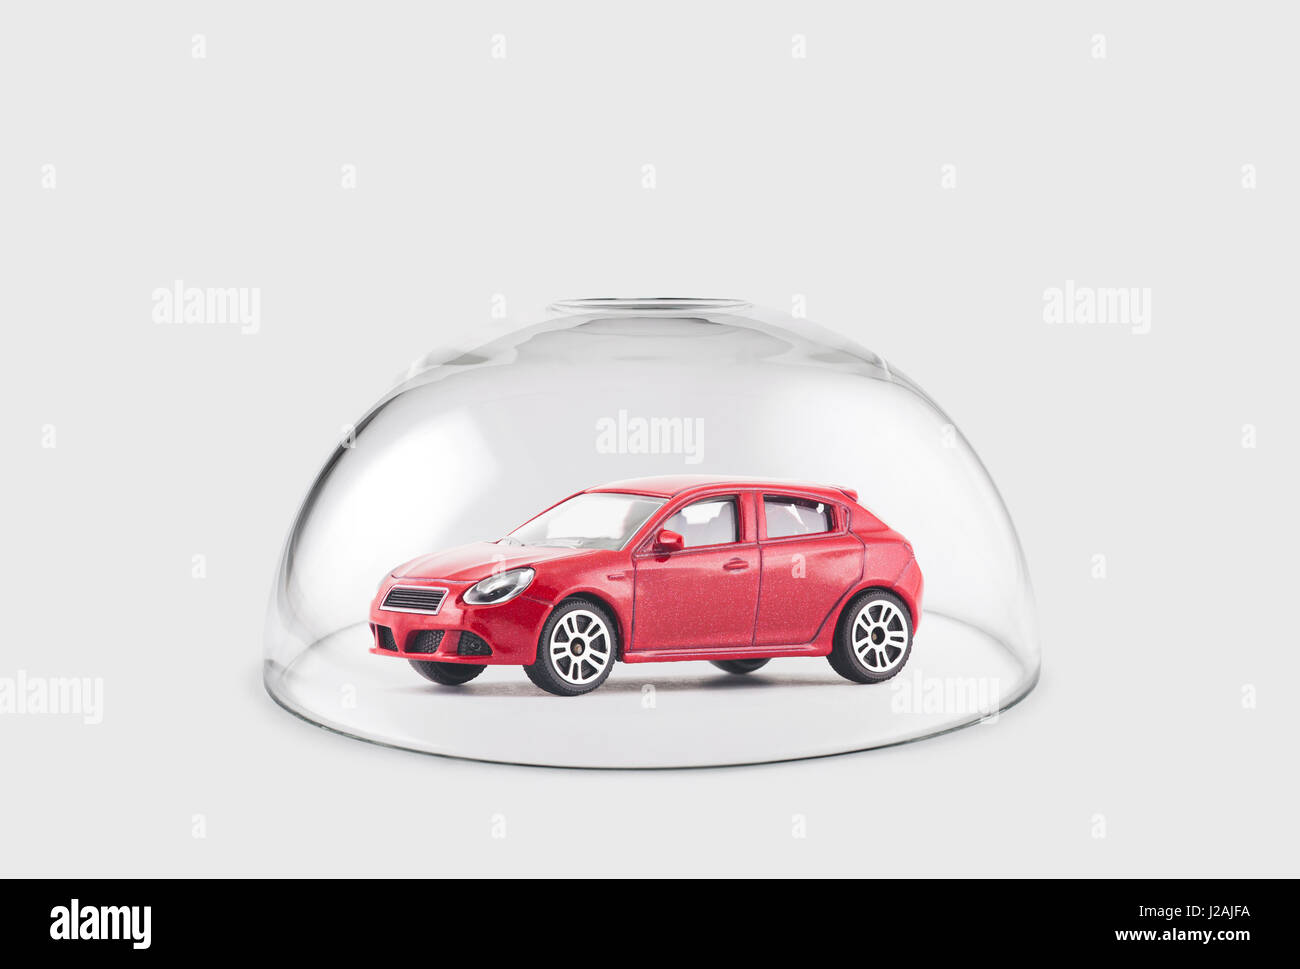 Red car protected under a glass dome Stock Photo